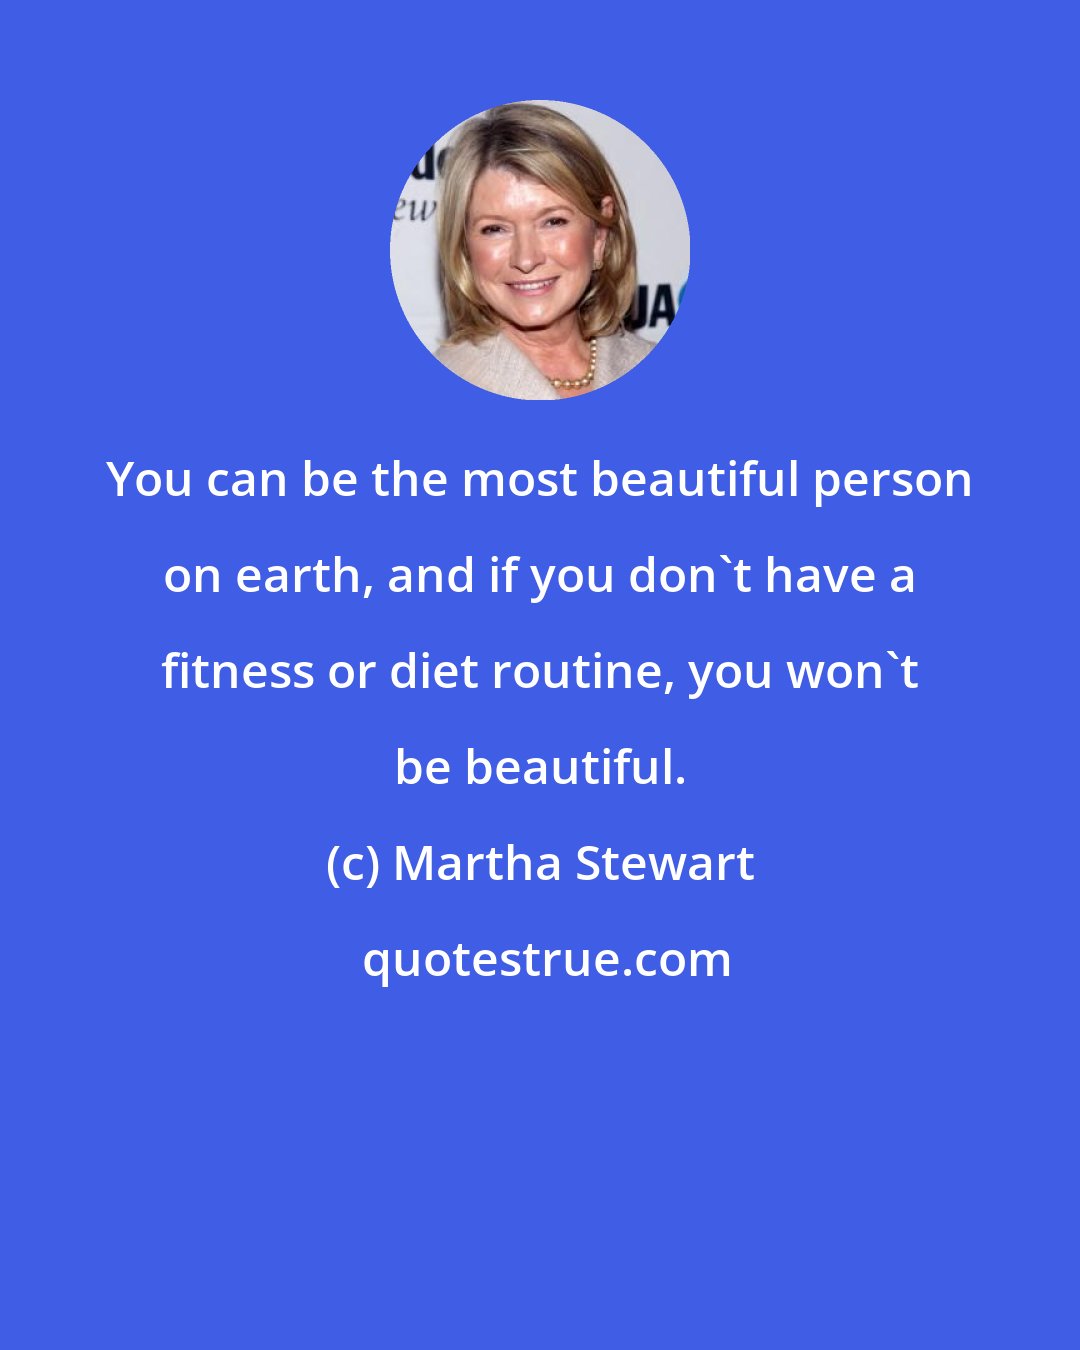 Martha Stewart: You can be the most beautiful person on earth, and if you don't have a fitness or diet routine, you won't be beautiful.